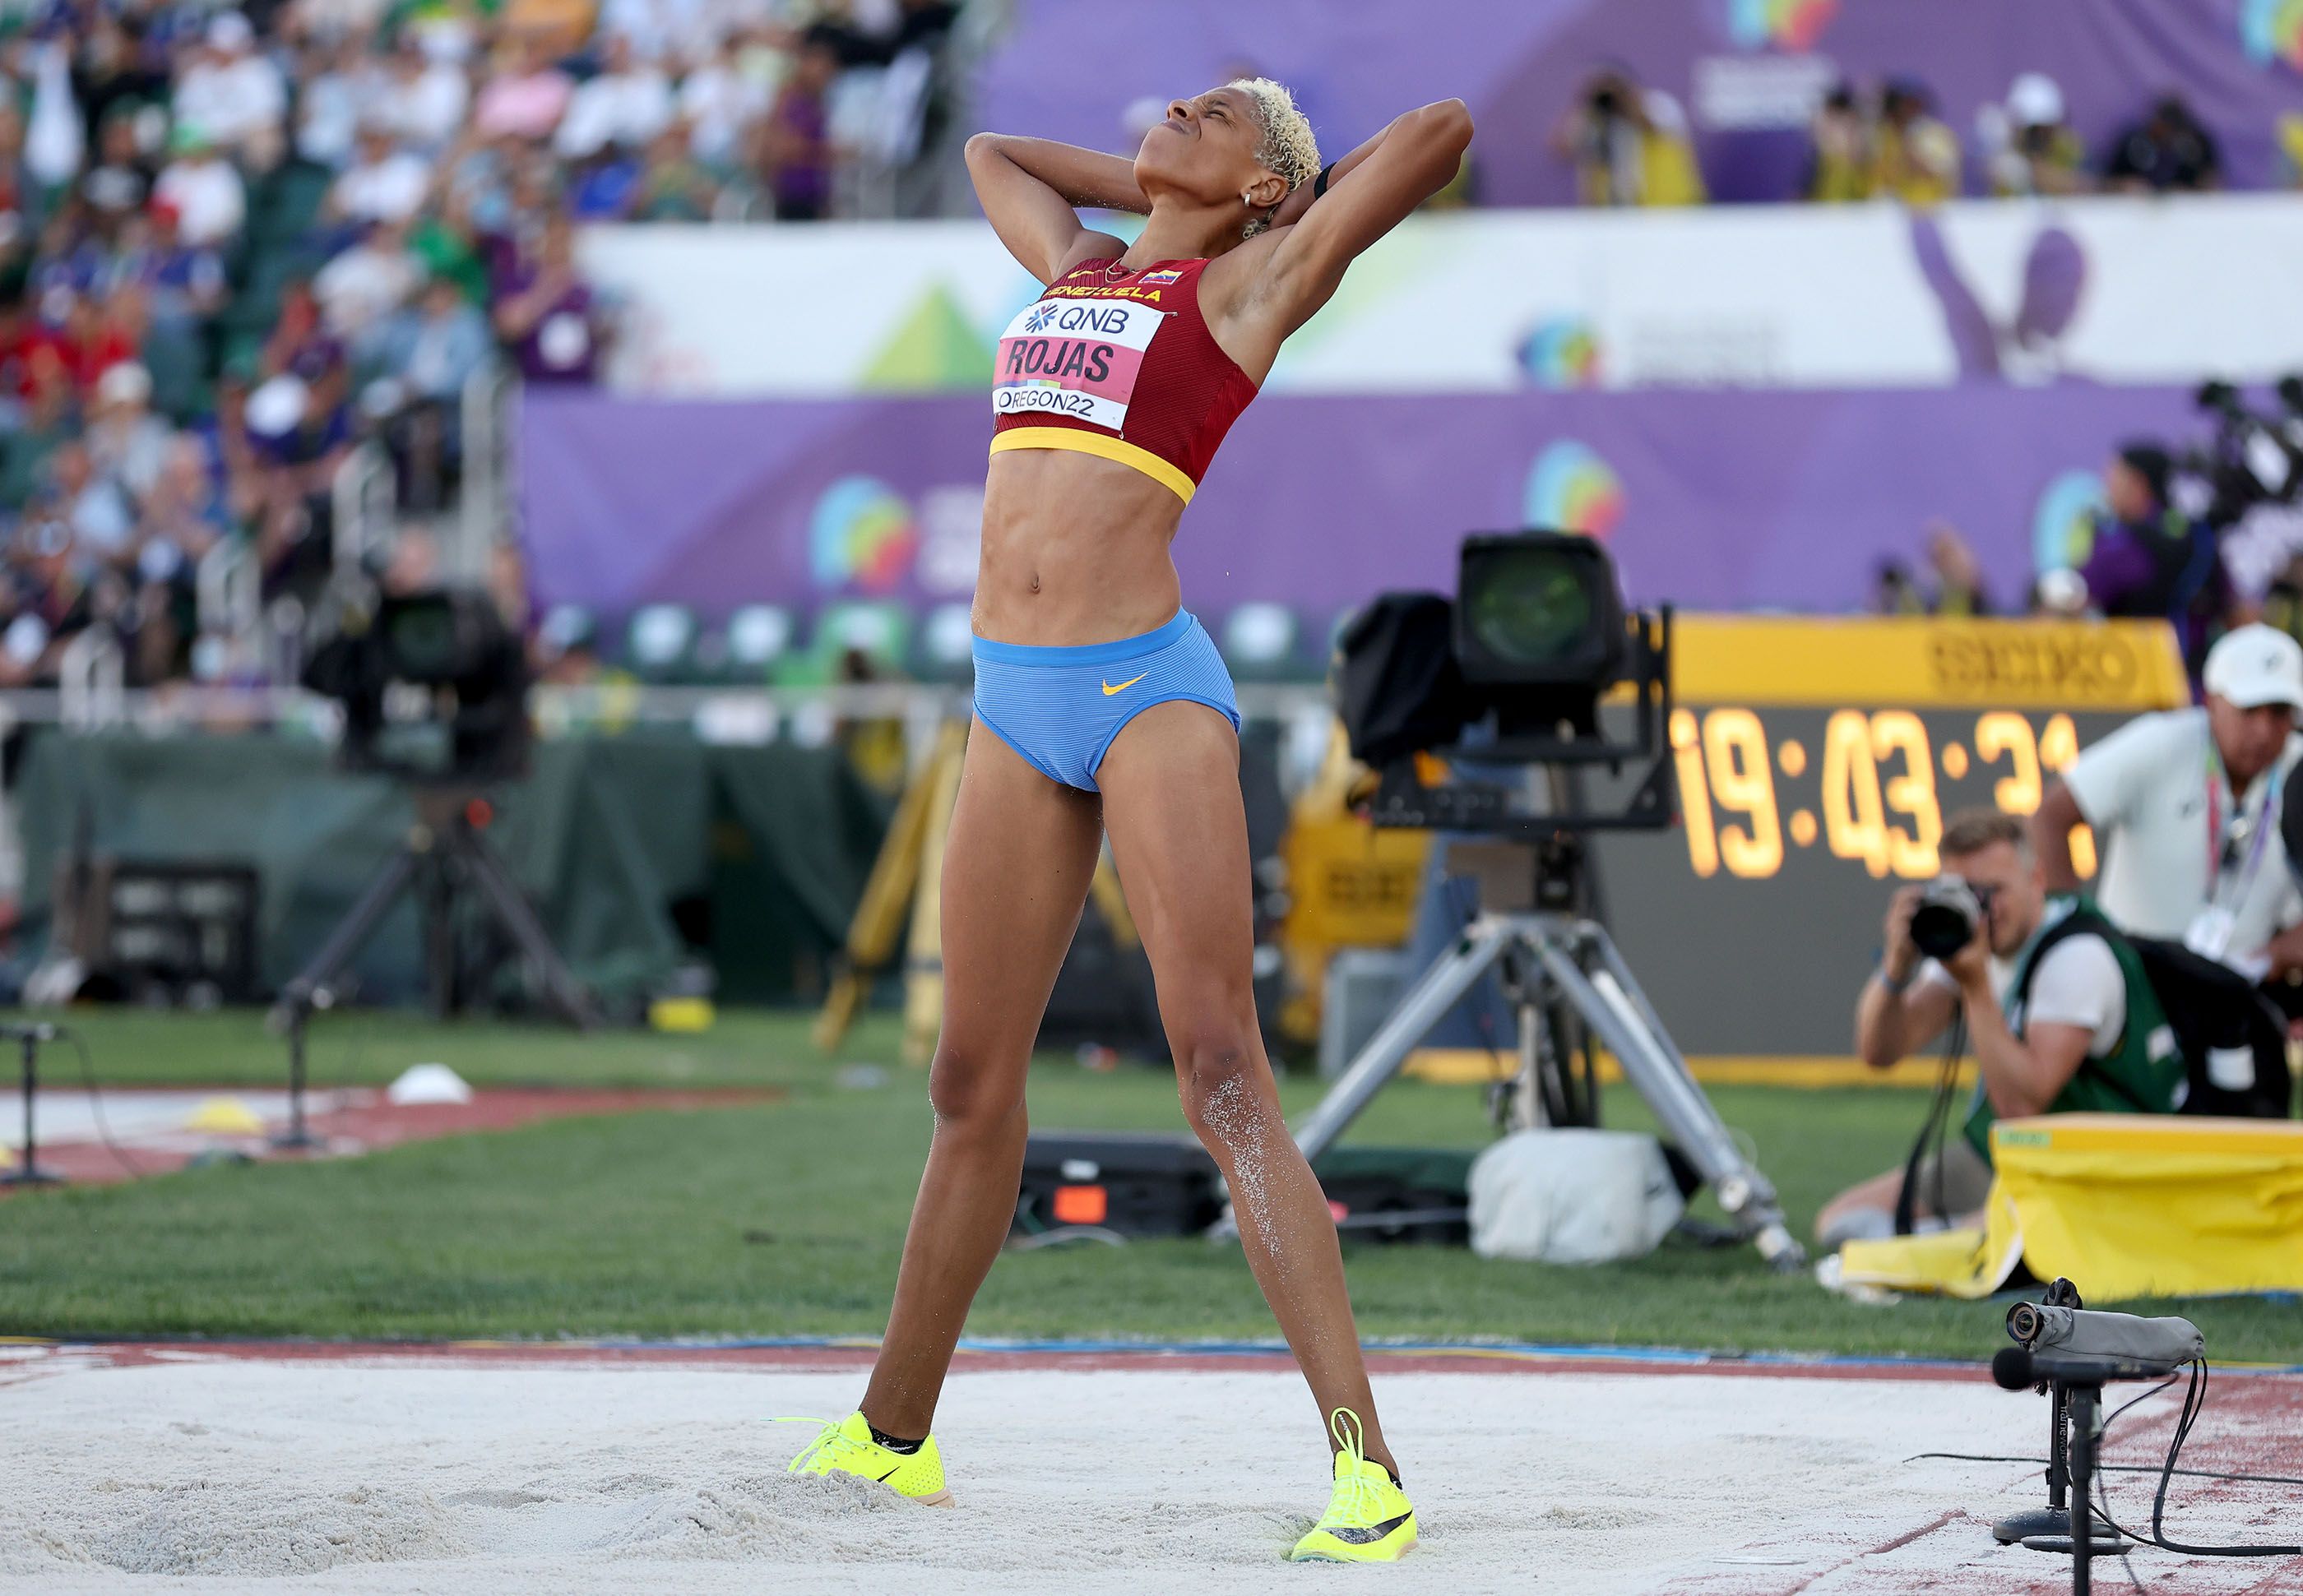 Yulimar Rojas celebrates her triple jump win at the World Athletics Championships Oregon22